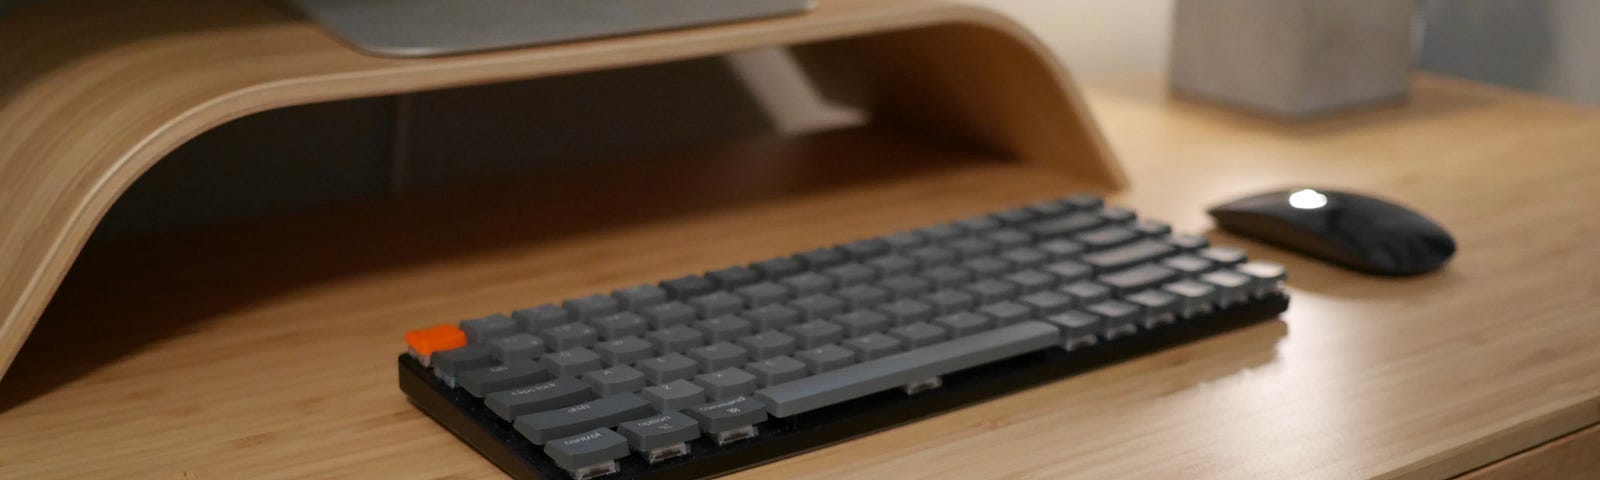 photo of the keychron k3 and a magic mouse on a bamboo desk